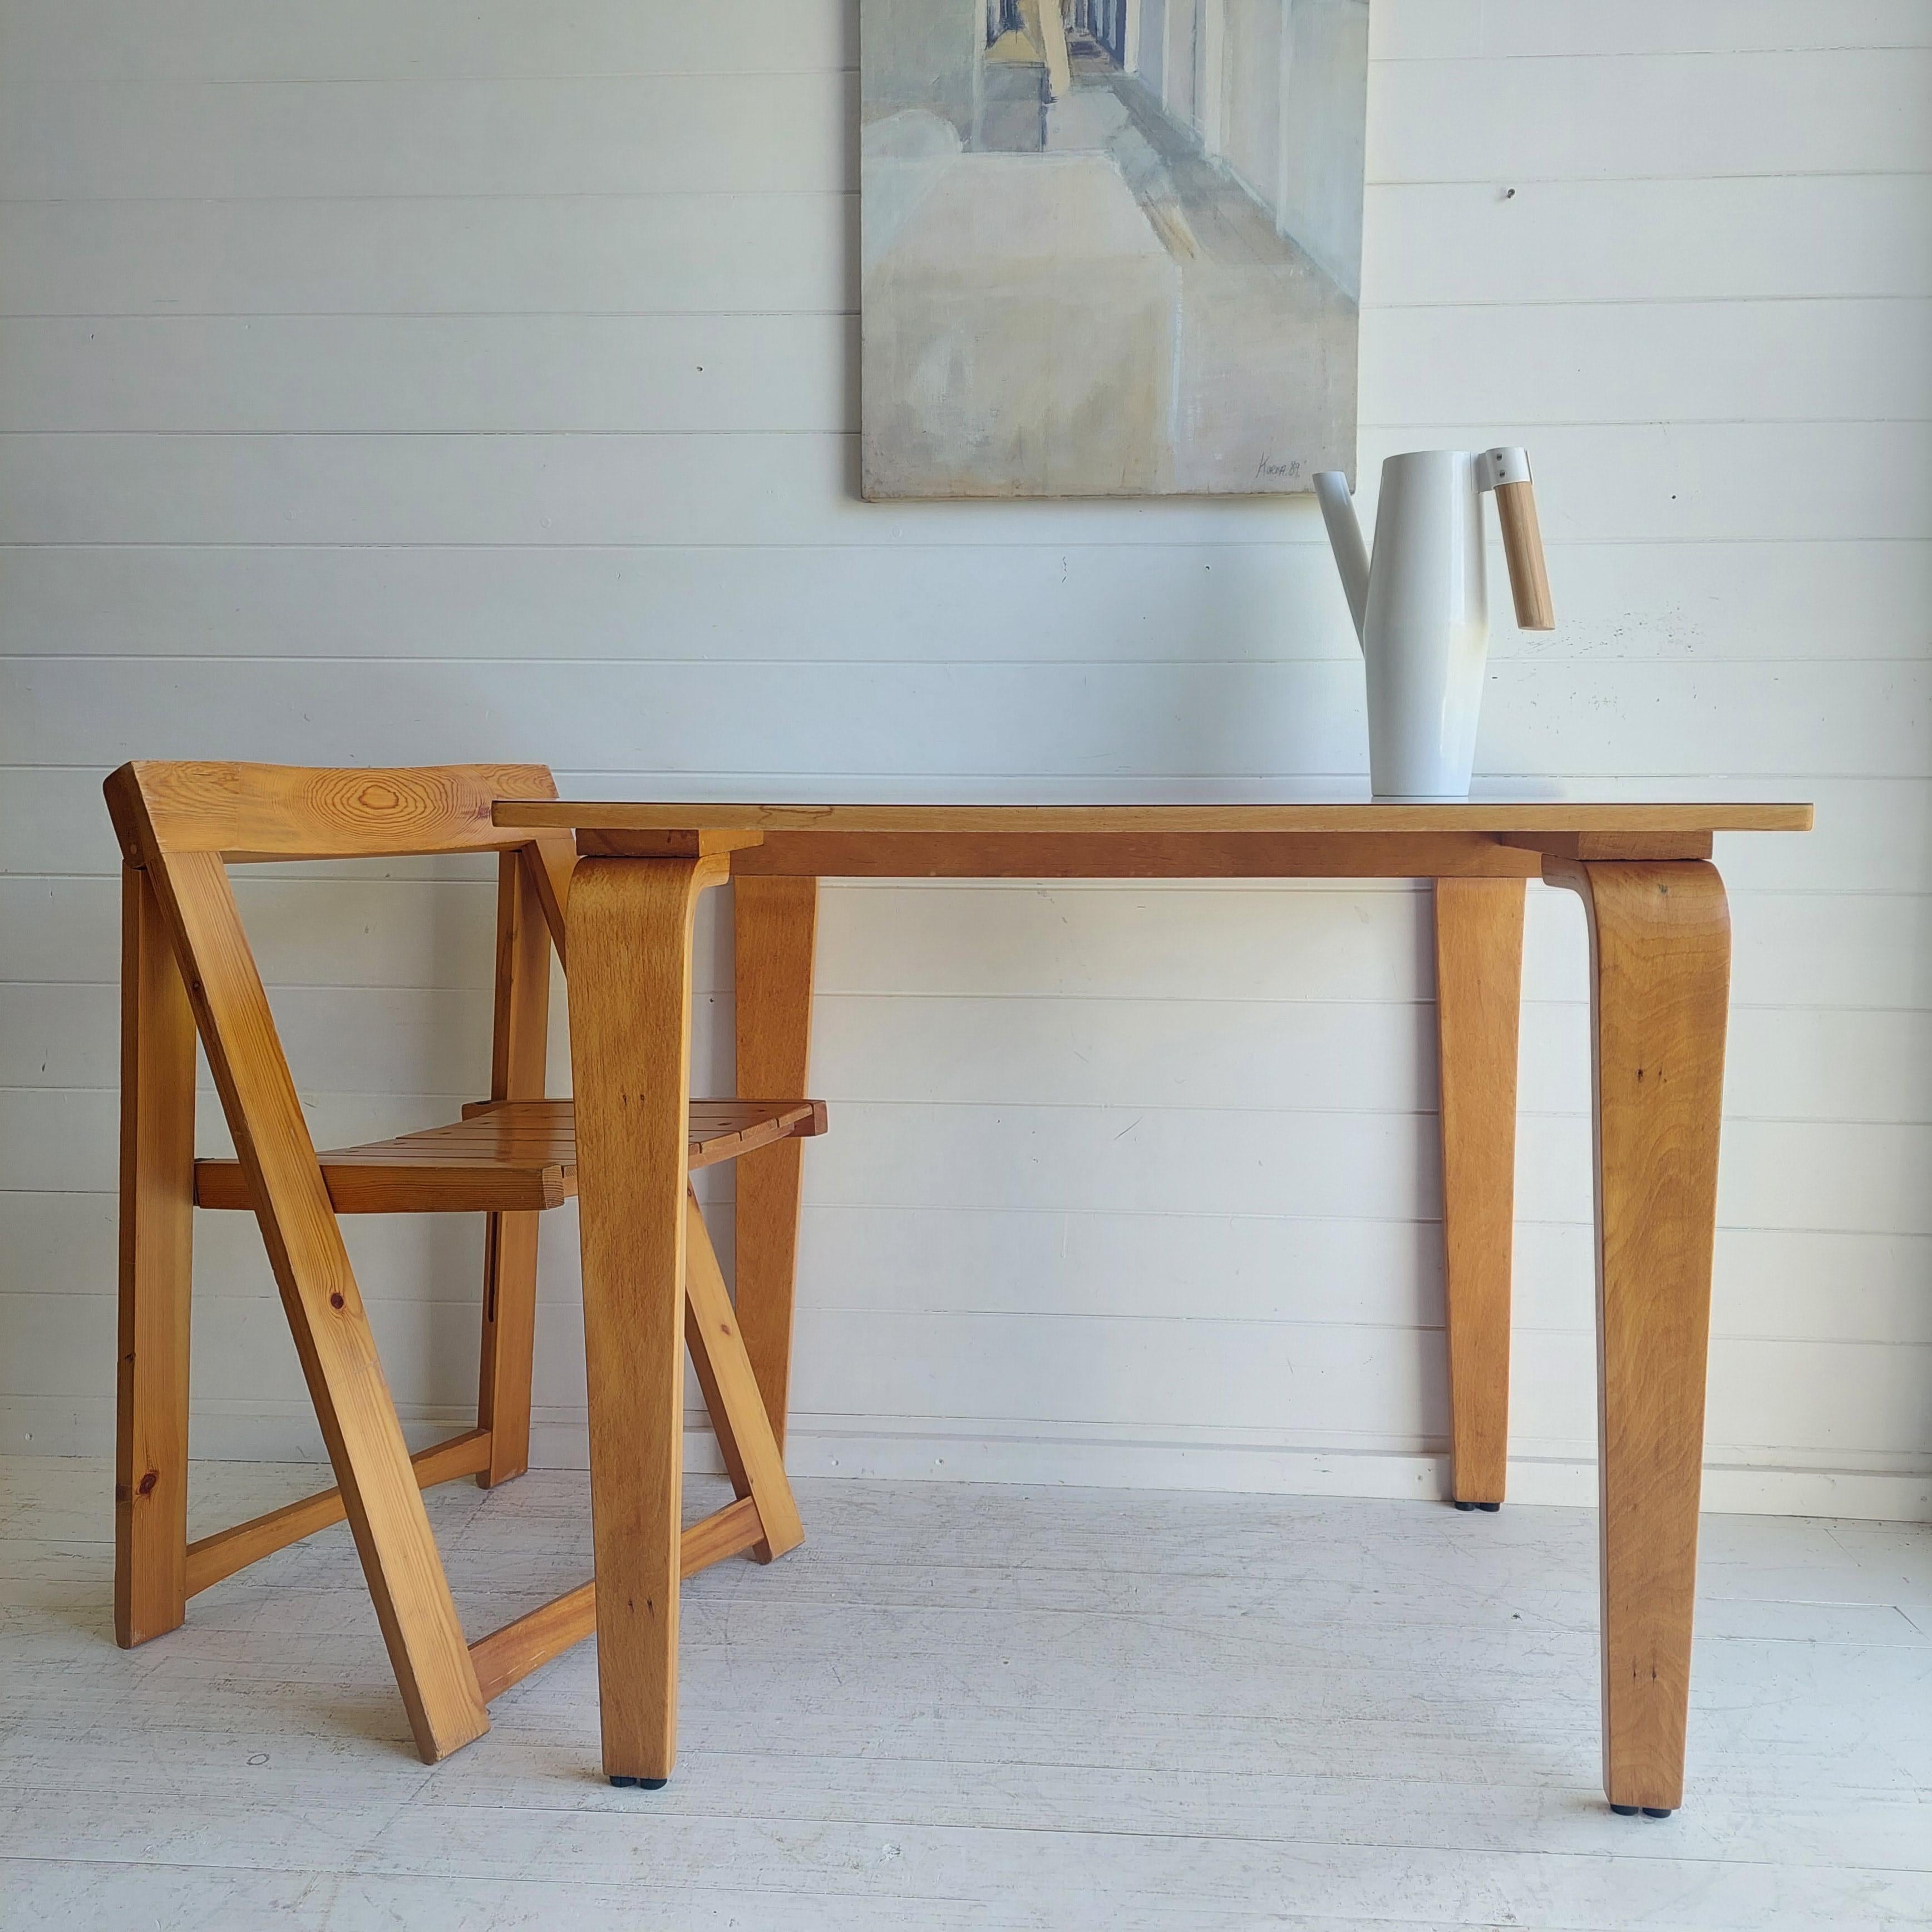 Esavian Mid Century Desk Esavian (ESA) by James Leonard adult teacher school desk, circa 1950, 
Mid-century British design with a Formica top and beech Bentwood legs with a lovely Scandinavian influence, Alvar Aalto Style
This is the more rare adult